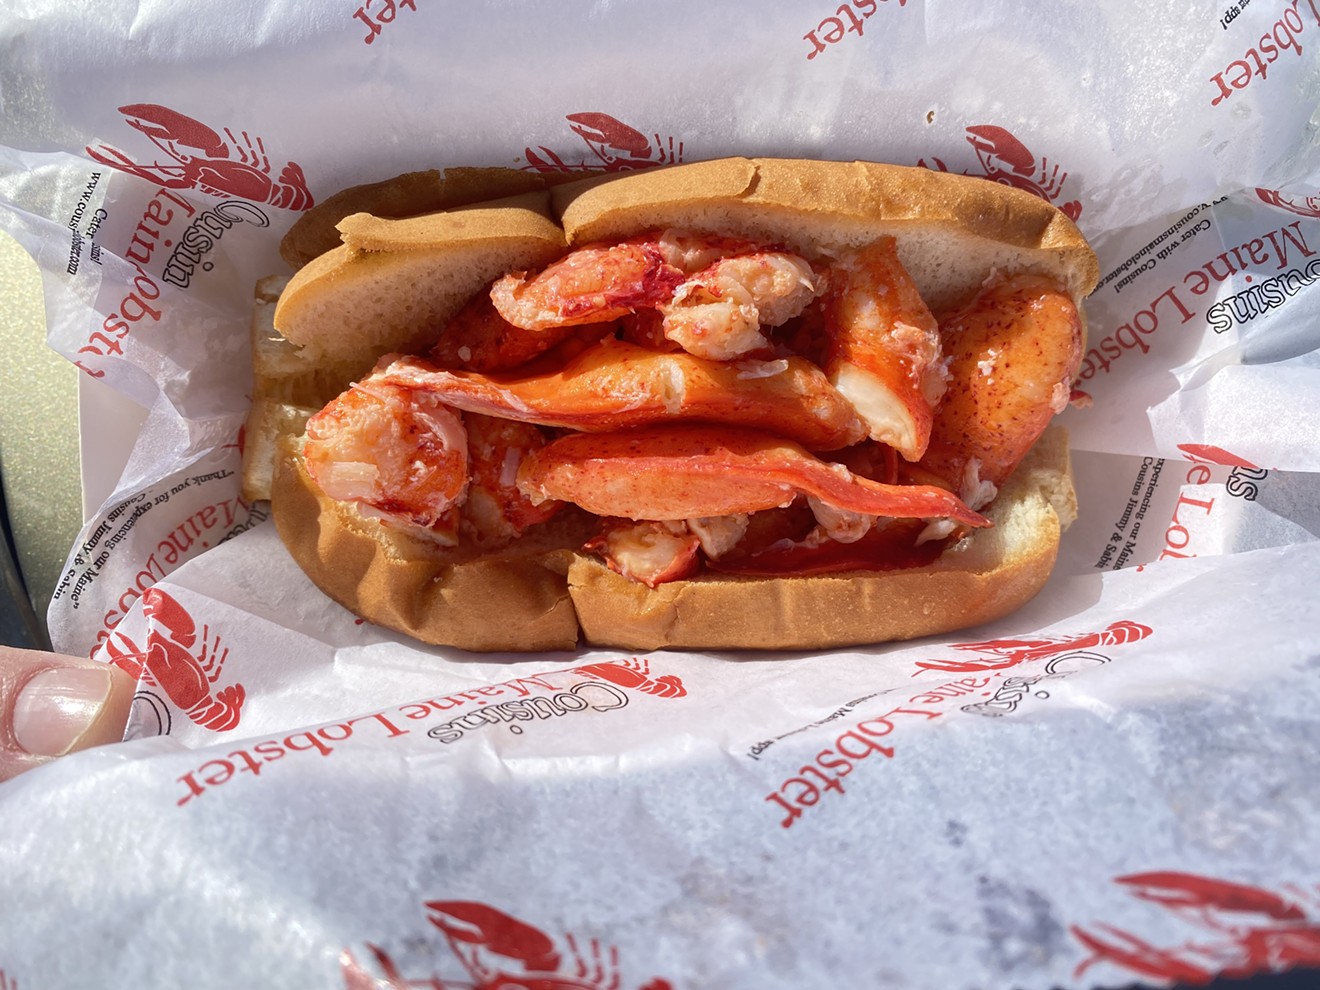 The Connecticut-style lobster roll.